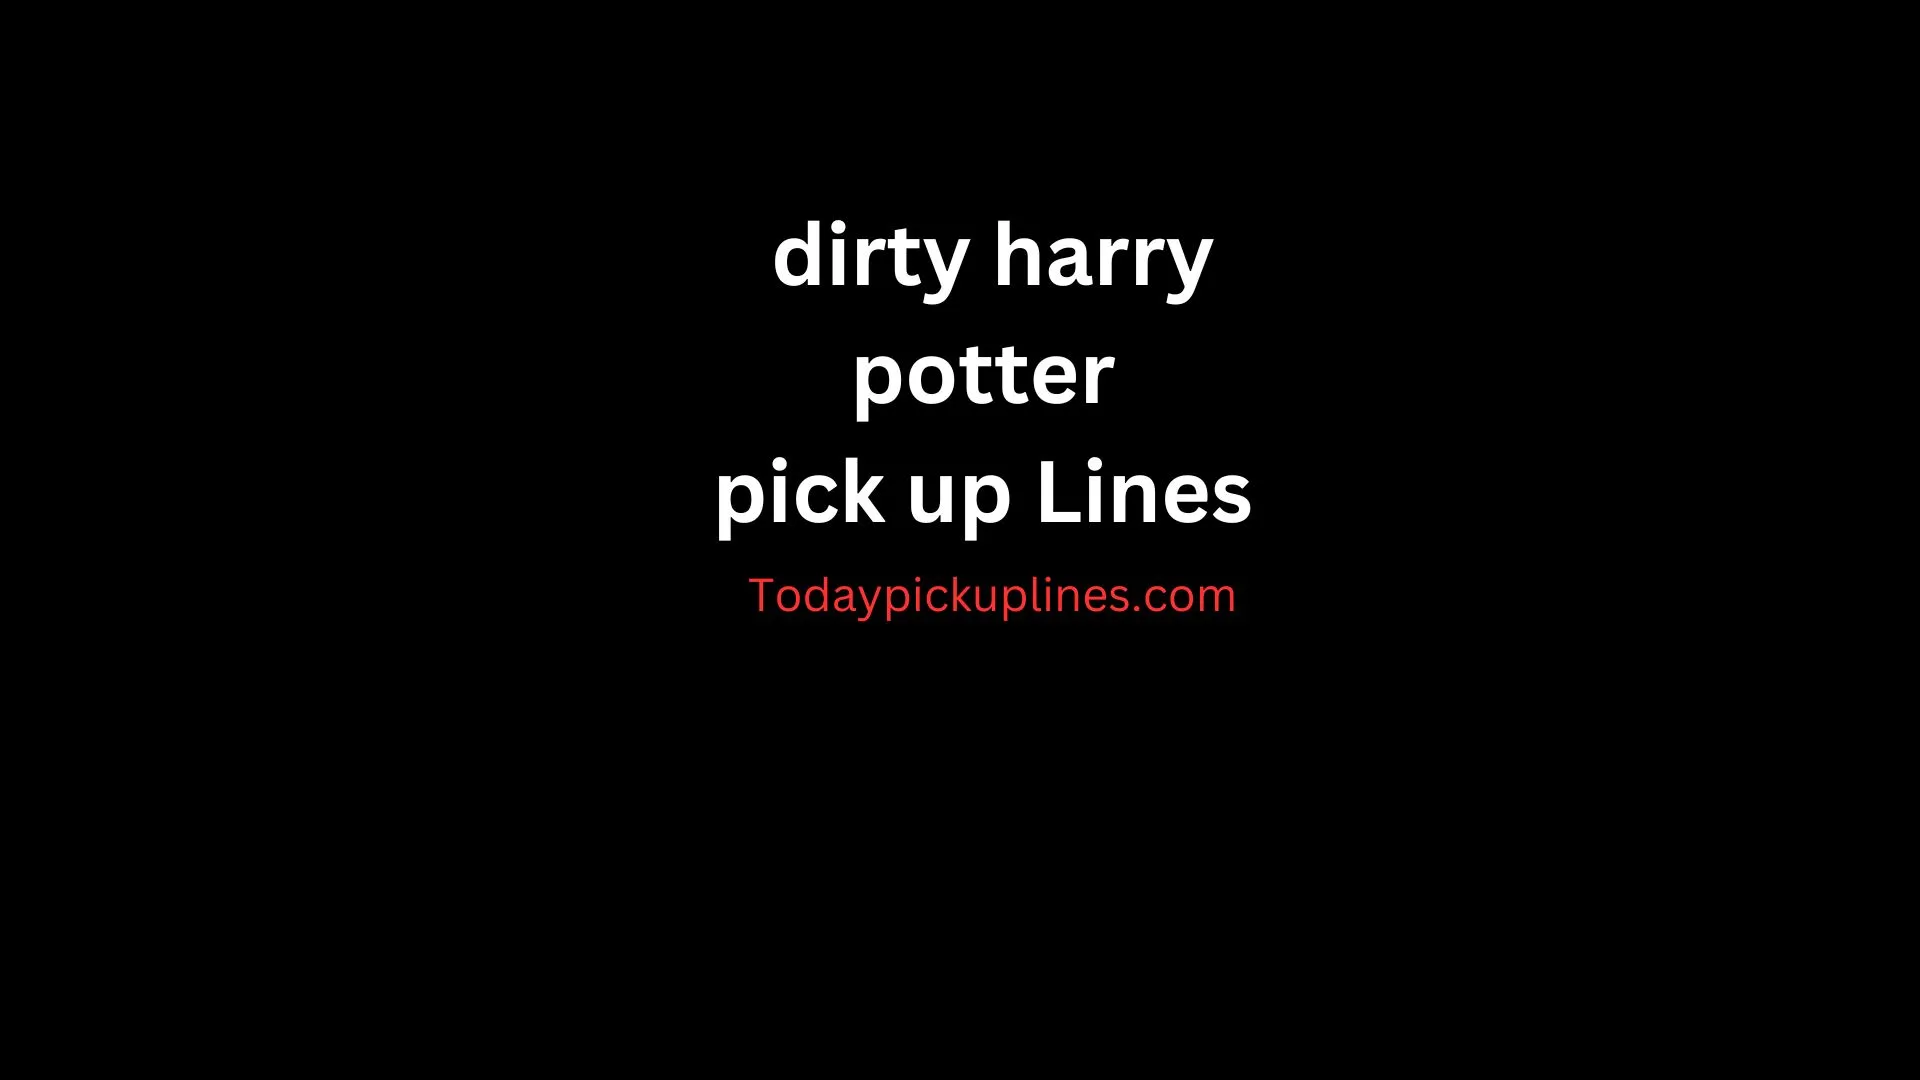 dirty harry potter pick up Lines